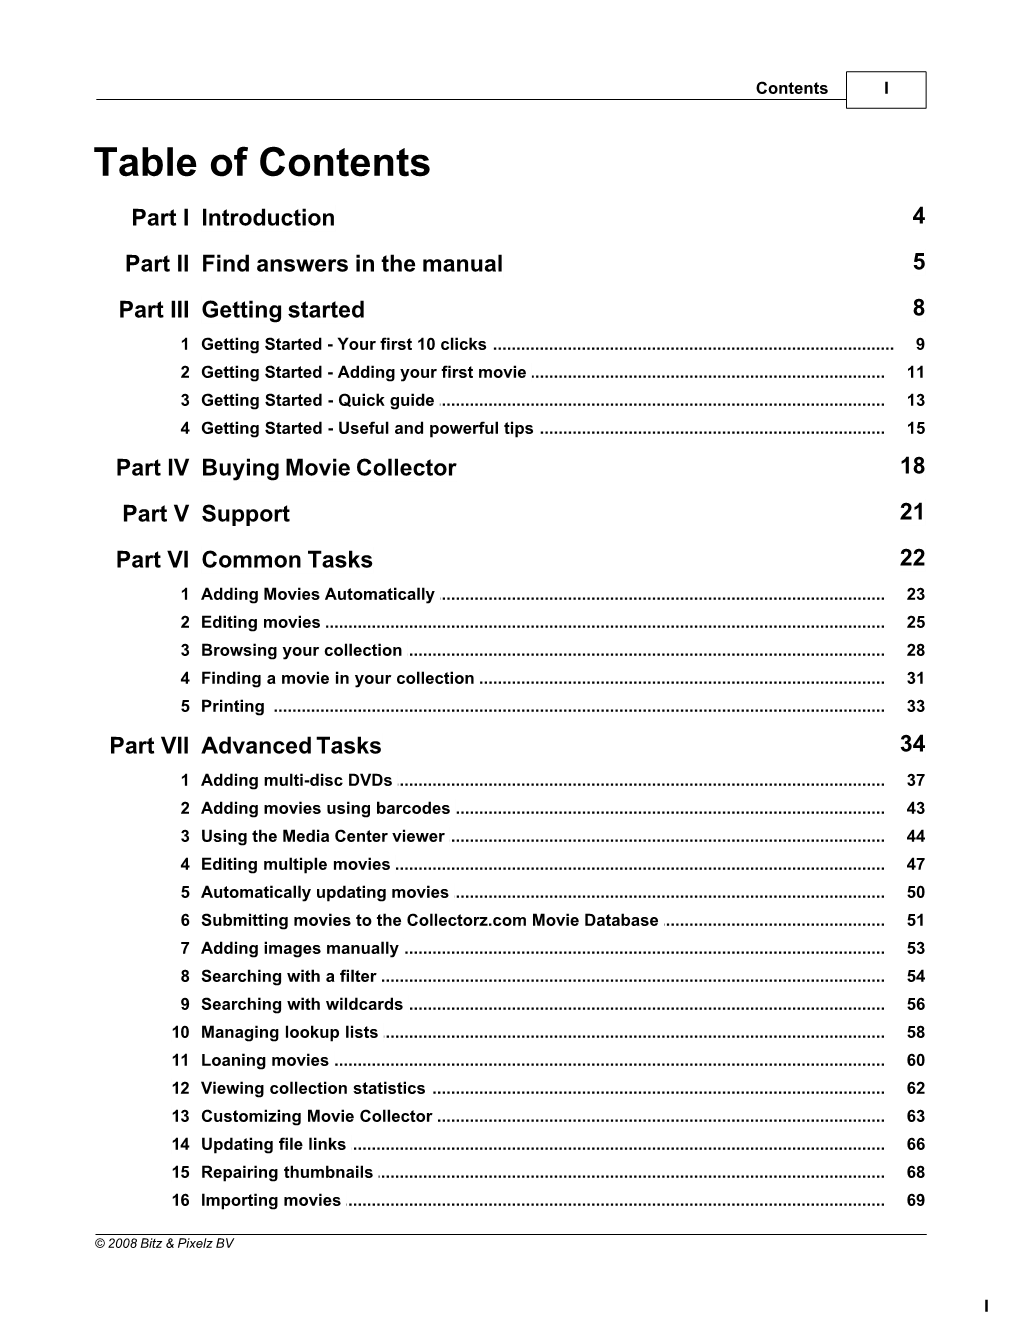 Table of Contents Part I Introduction 4 Part II Find Answers in the Manual 5 Part III Getting Started 8 1 Getting Started